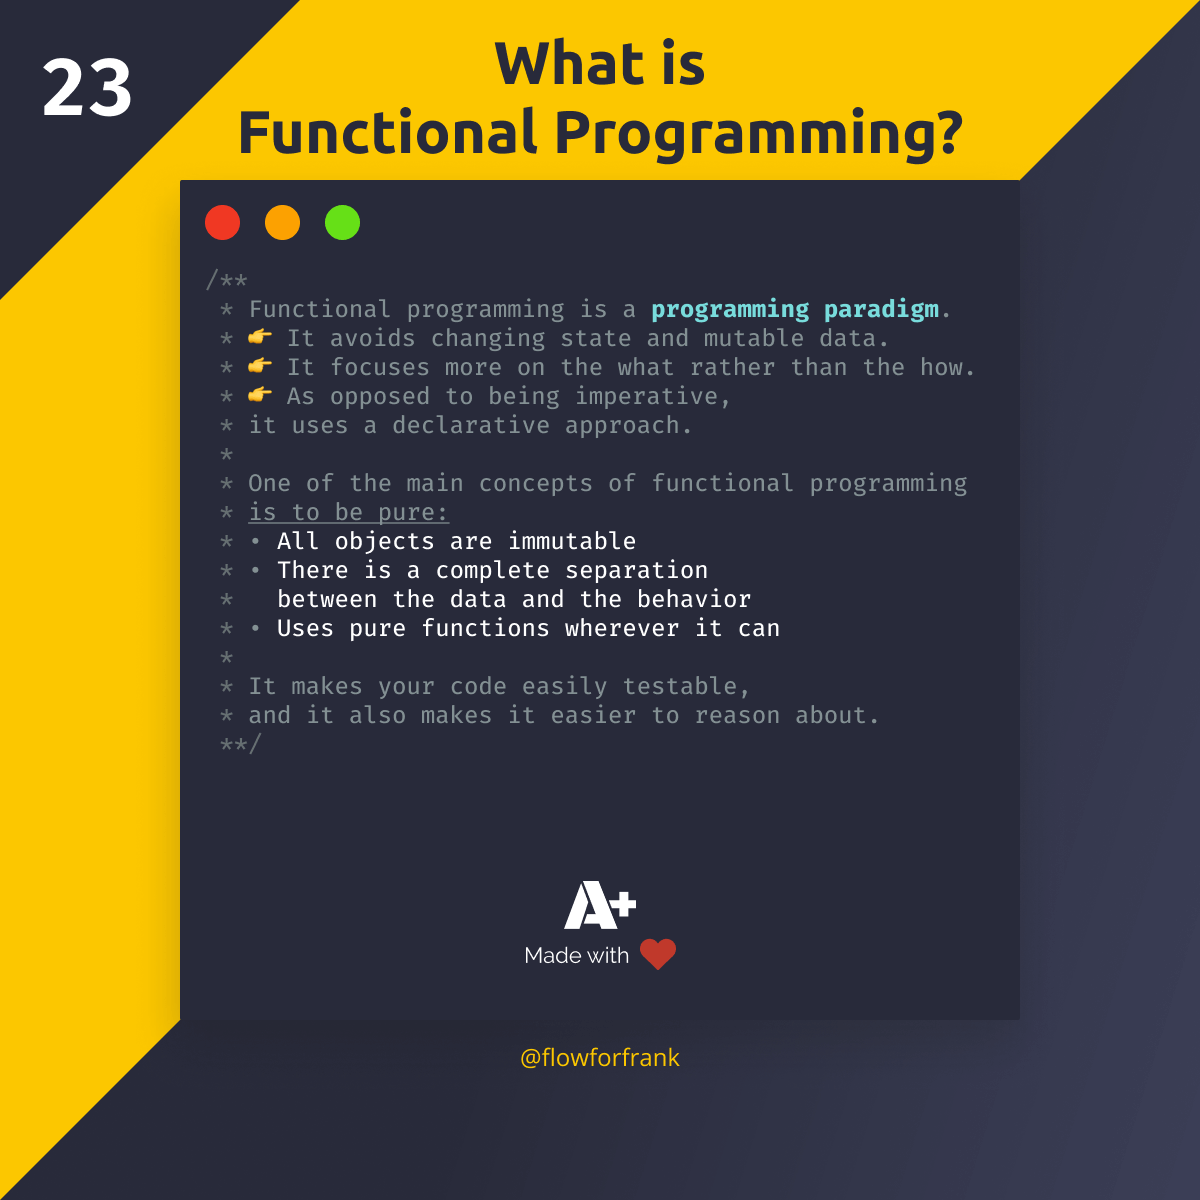 What is Functional Programming?